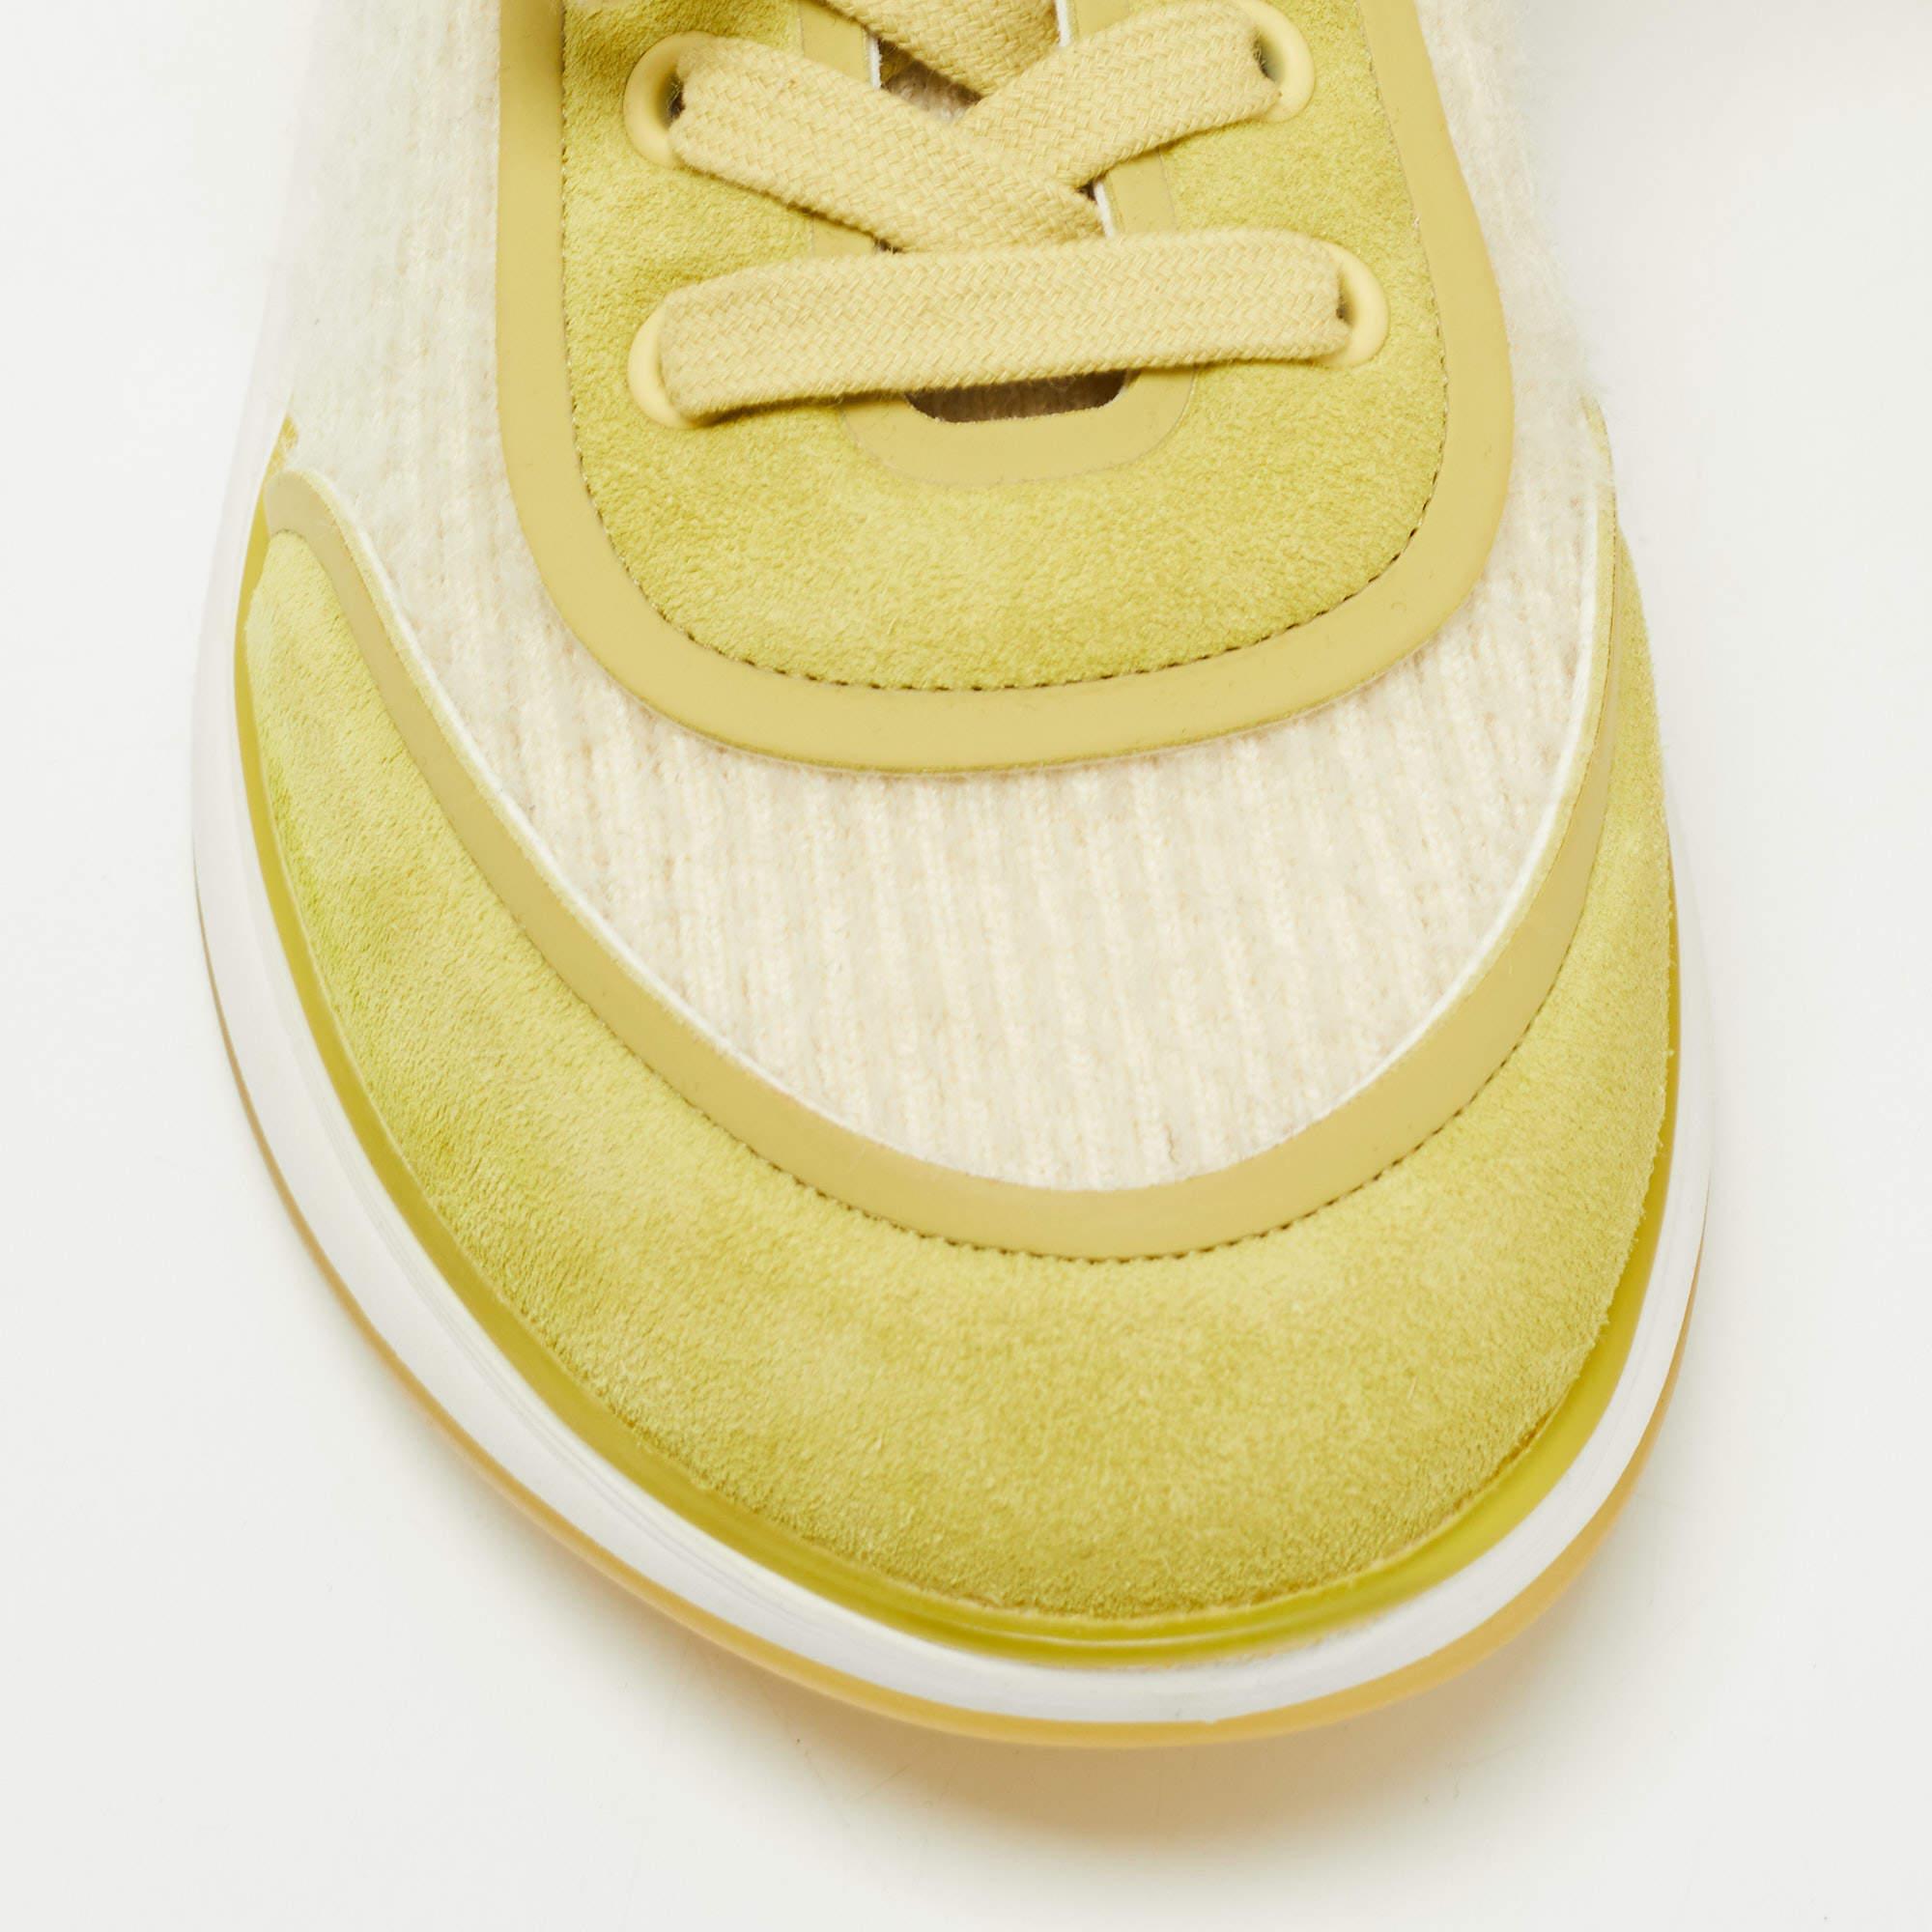 Women's Chanel Green/Beige Suede, Leather and Knit Fabric CC Low Top Sneakers Size 39